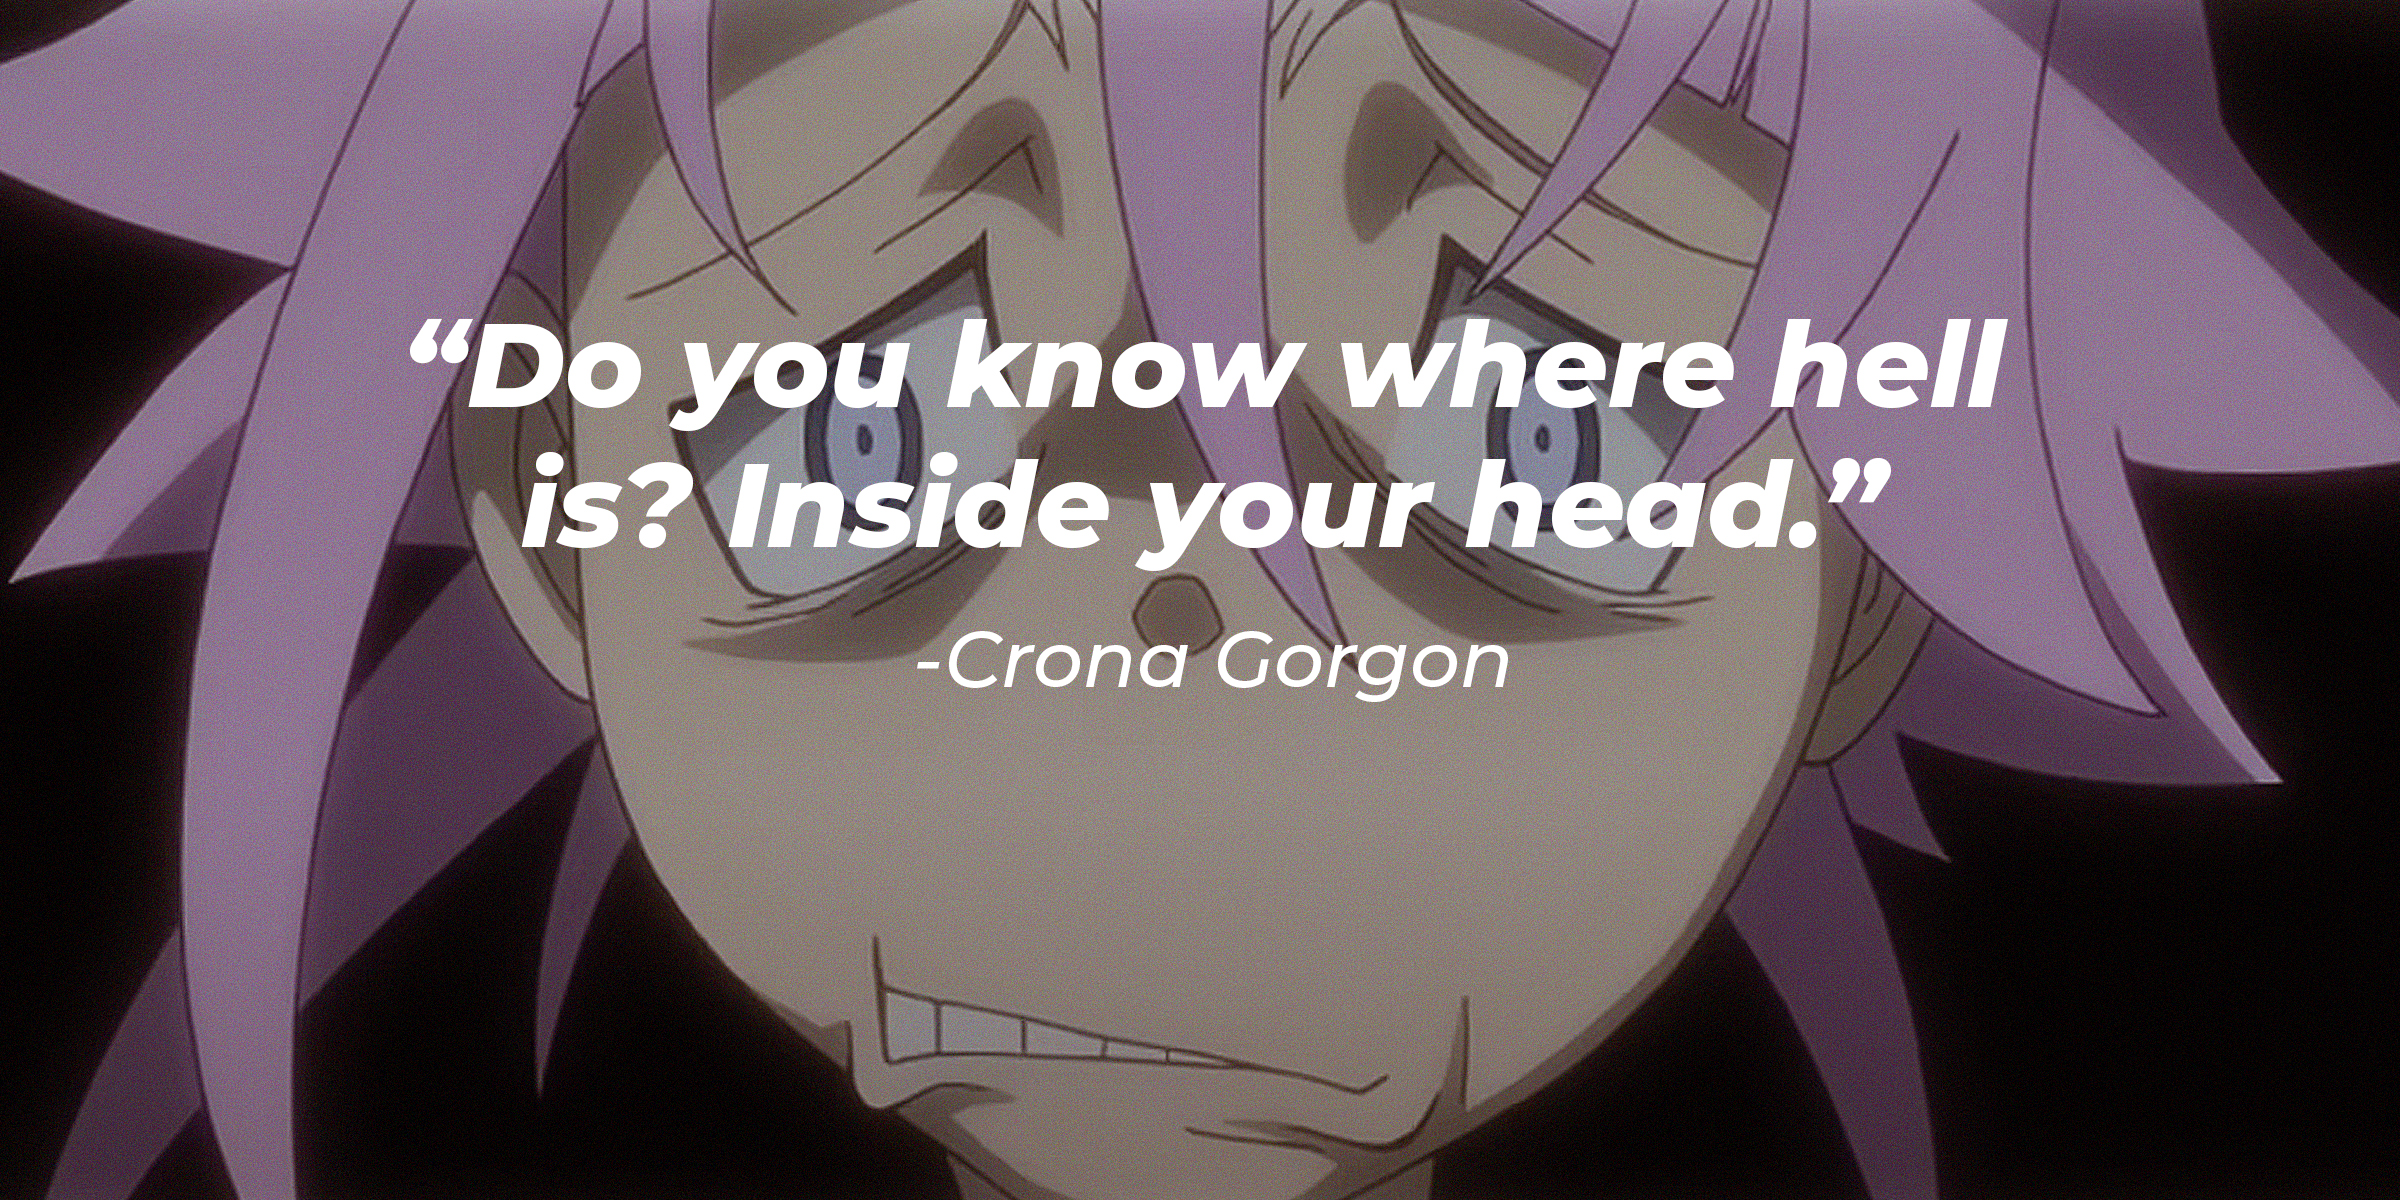 Source: youtube.com/Crunchyroll Dubs | A picture of Crona Gorgon with a quote by him reading, "Do you know where hell is? Inside your head."